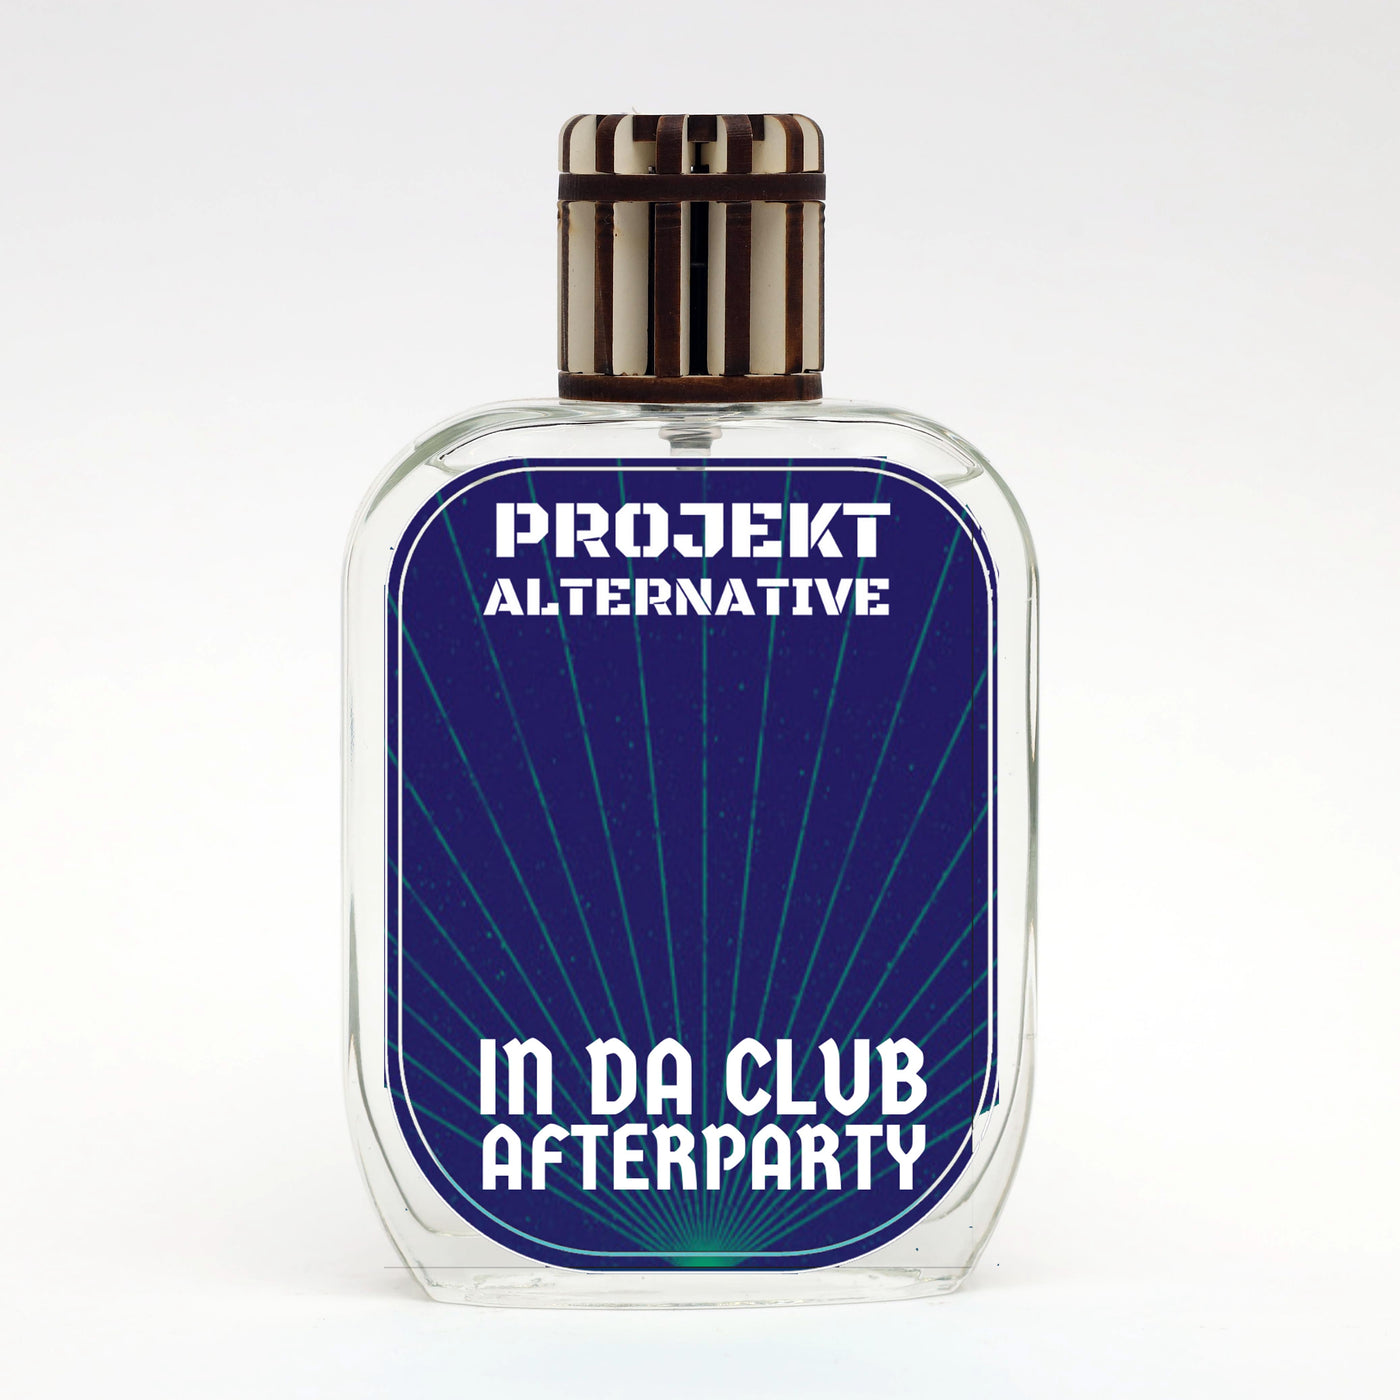 In Da Club Intense "After Party" By Projekt Alternative 100ml Parfum #CDNMI-RIPPED-APART With Ambroxan